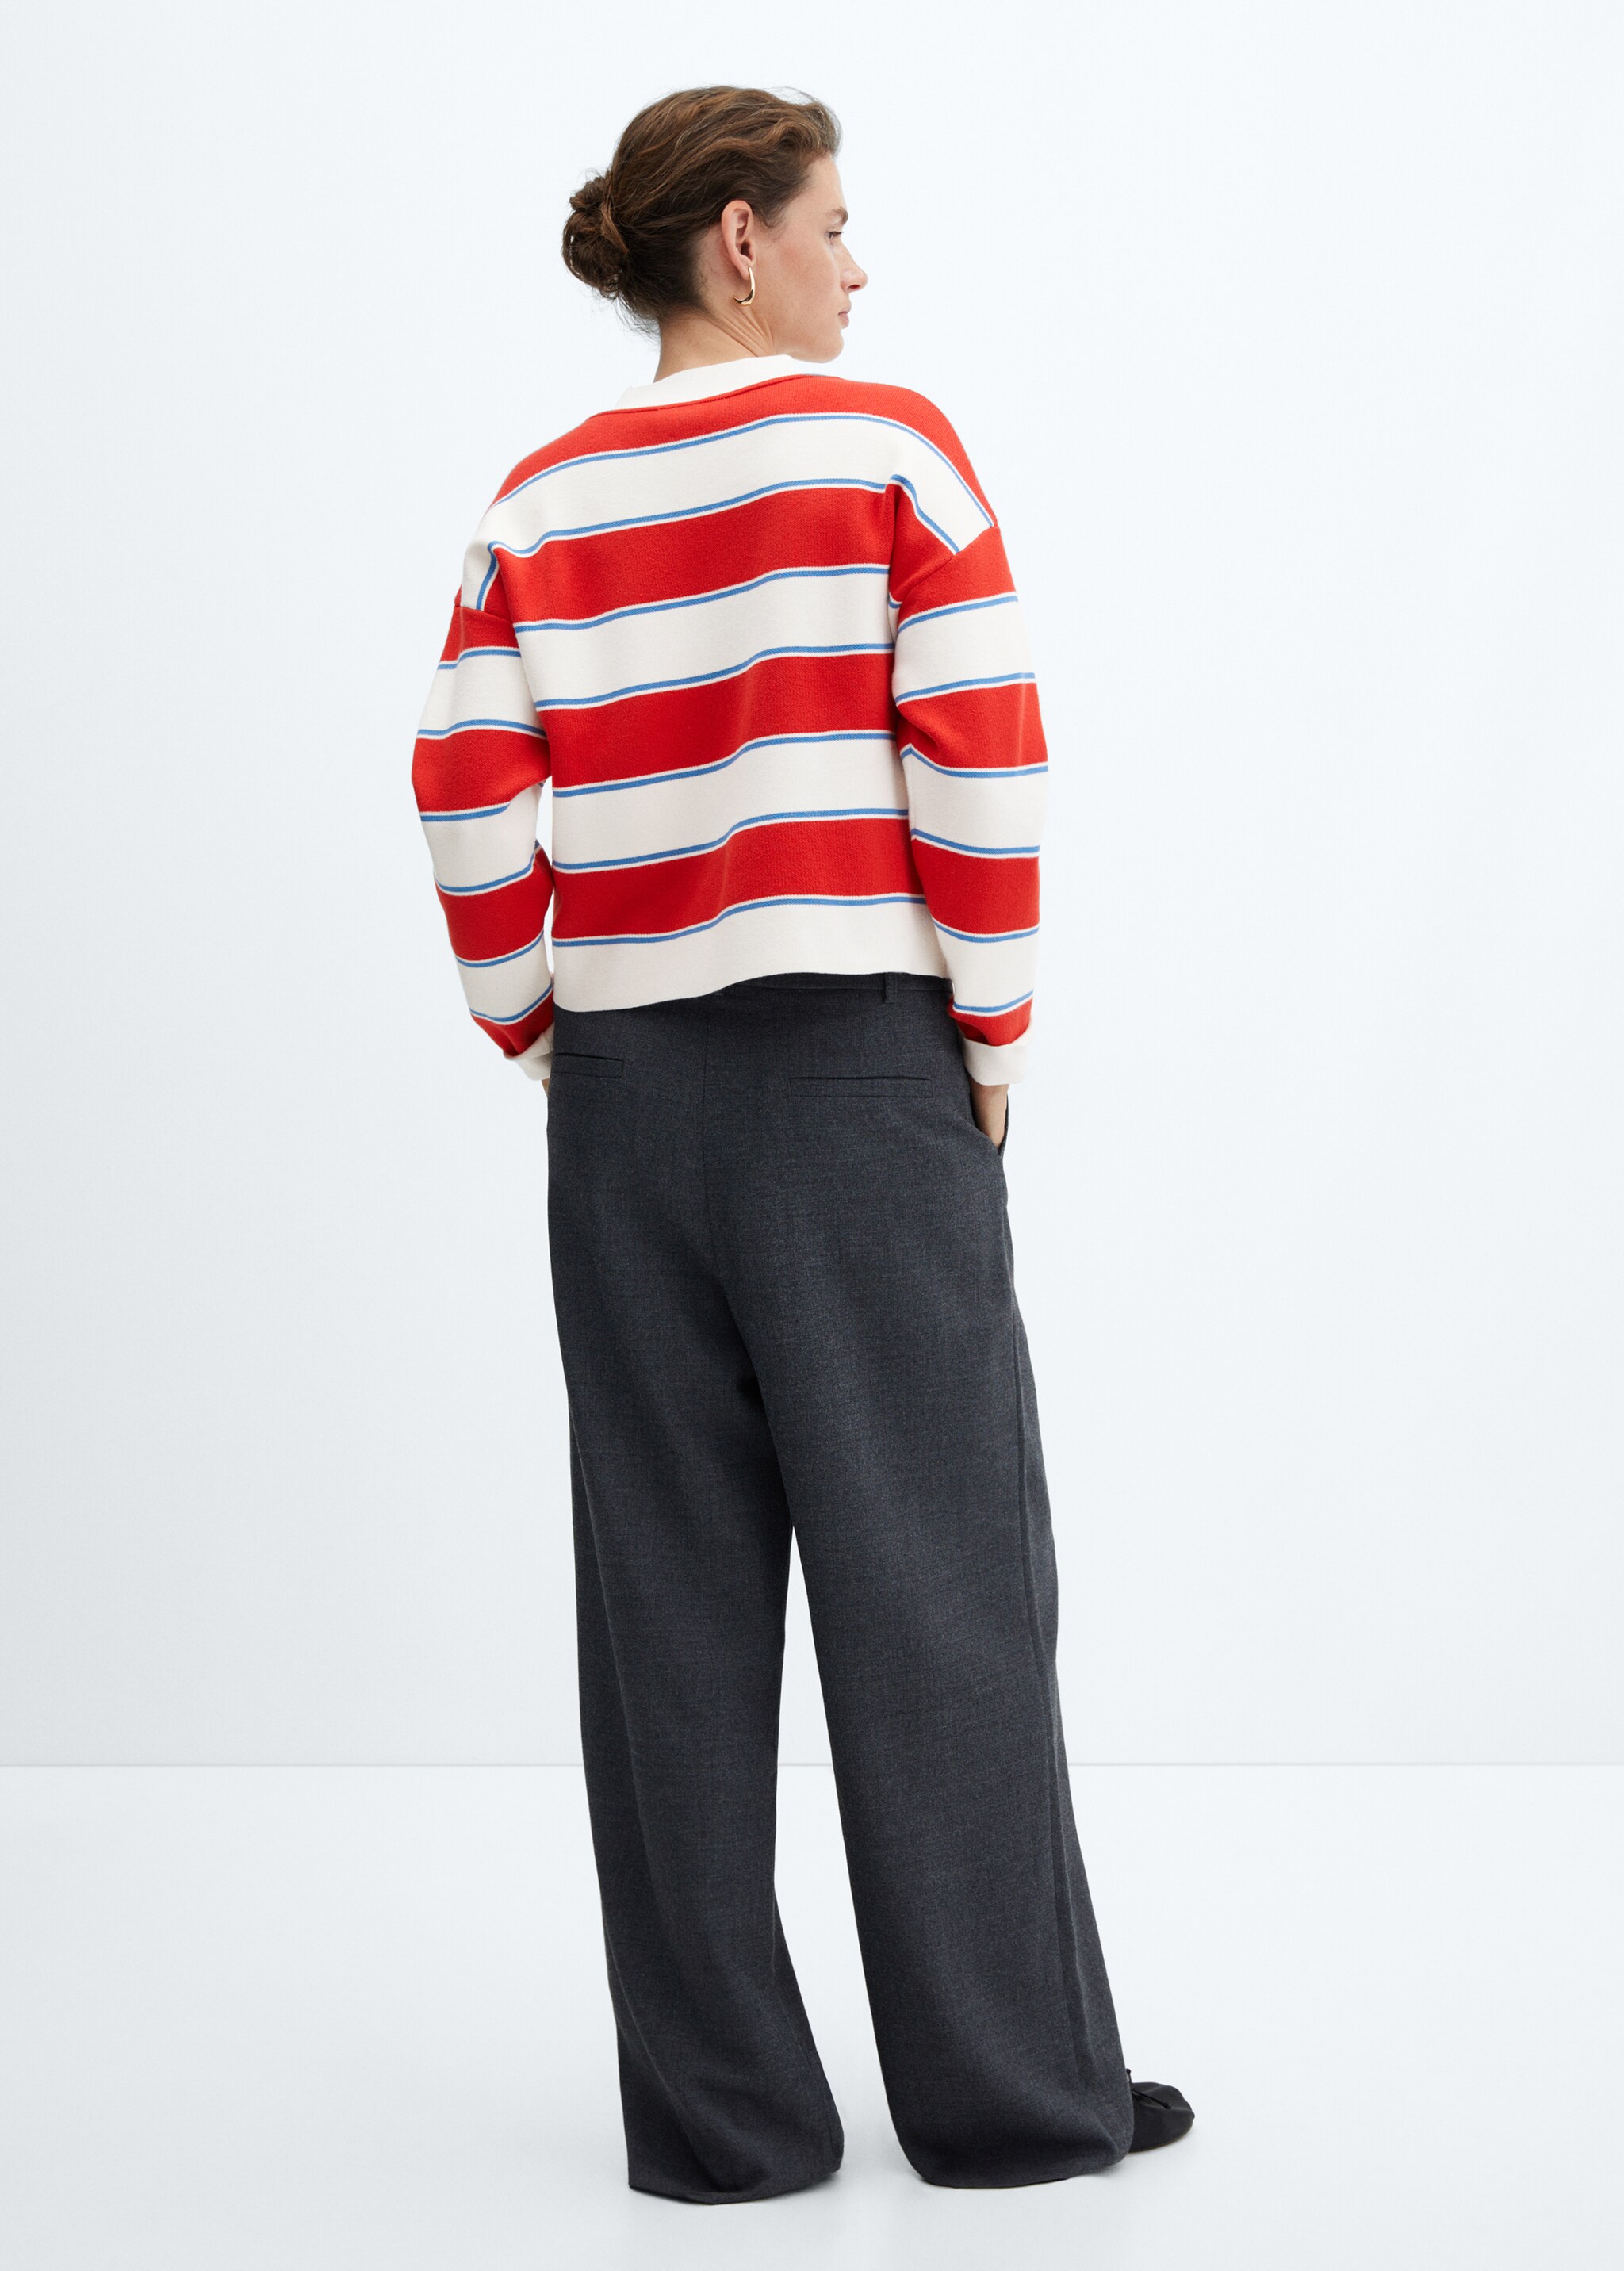 Wide-striped sweater - Reverse of the article